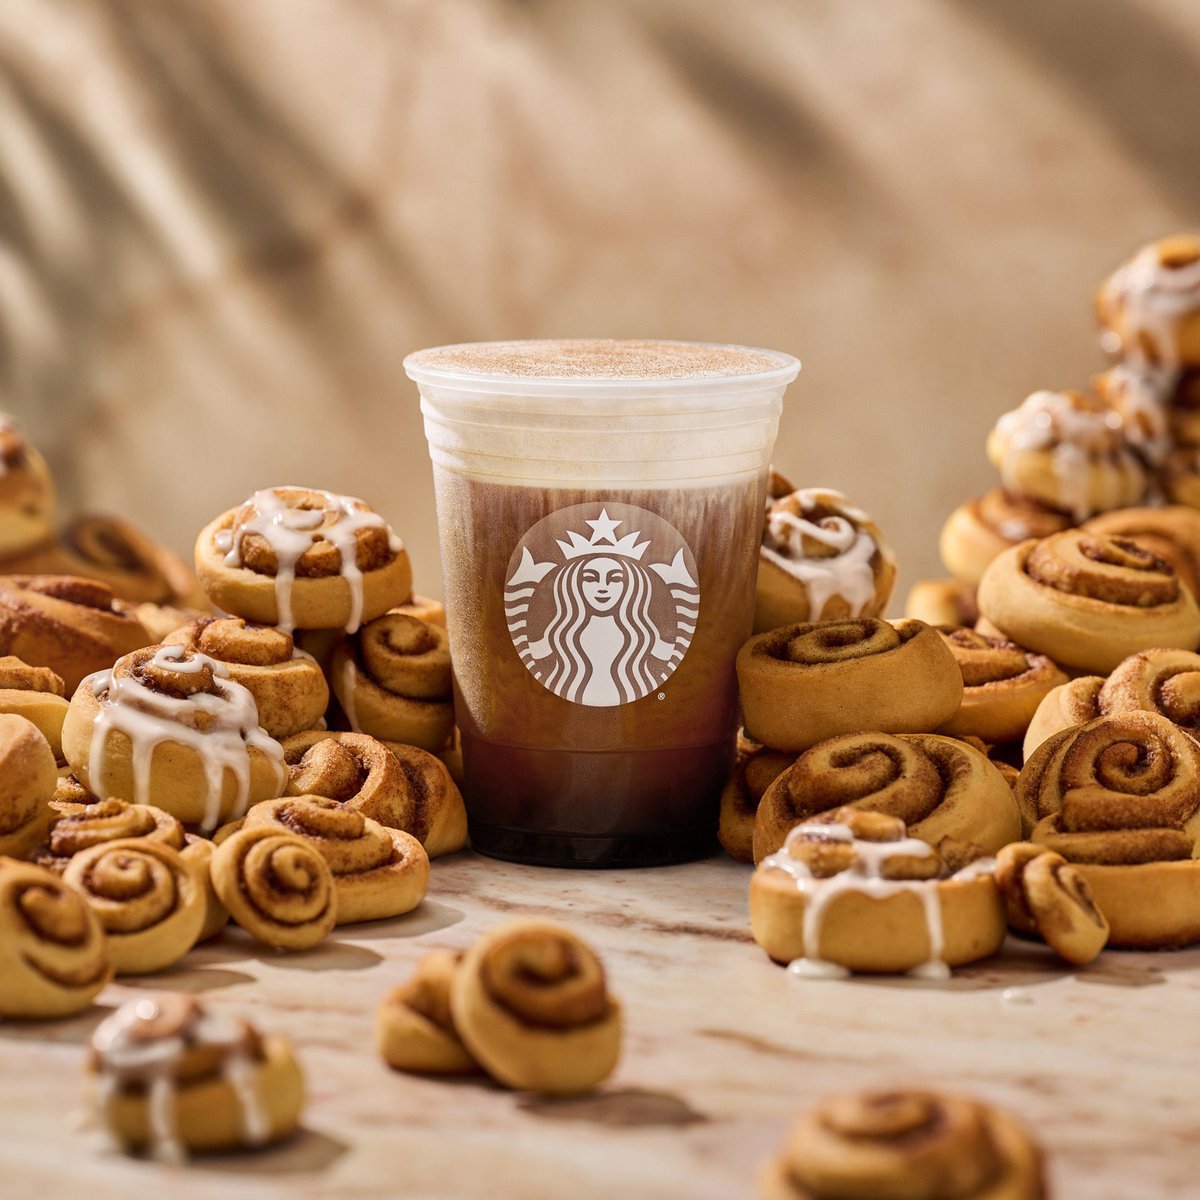 Say hello to the new Cinnamon Caramel Cream Cold Brew. Ooey gooey cinnamon roll bliss in every sip.  #cinnamoncaramelcreamcoldbrew #bncafe #coldbrew #barnesandnoble